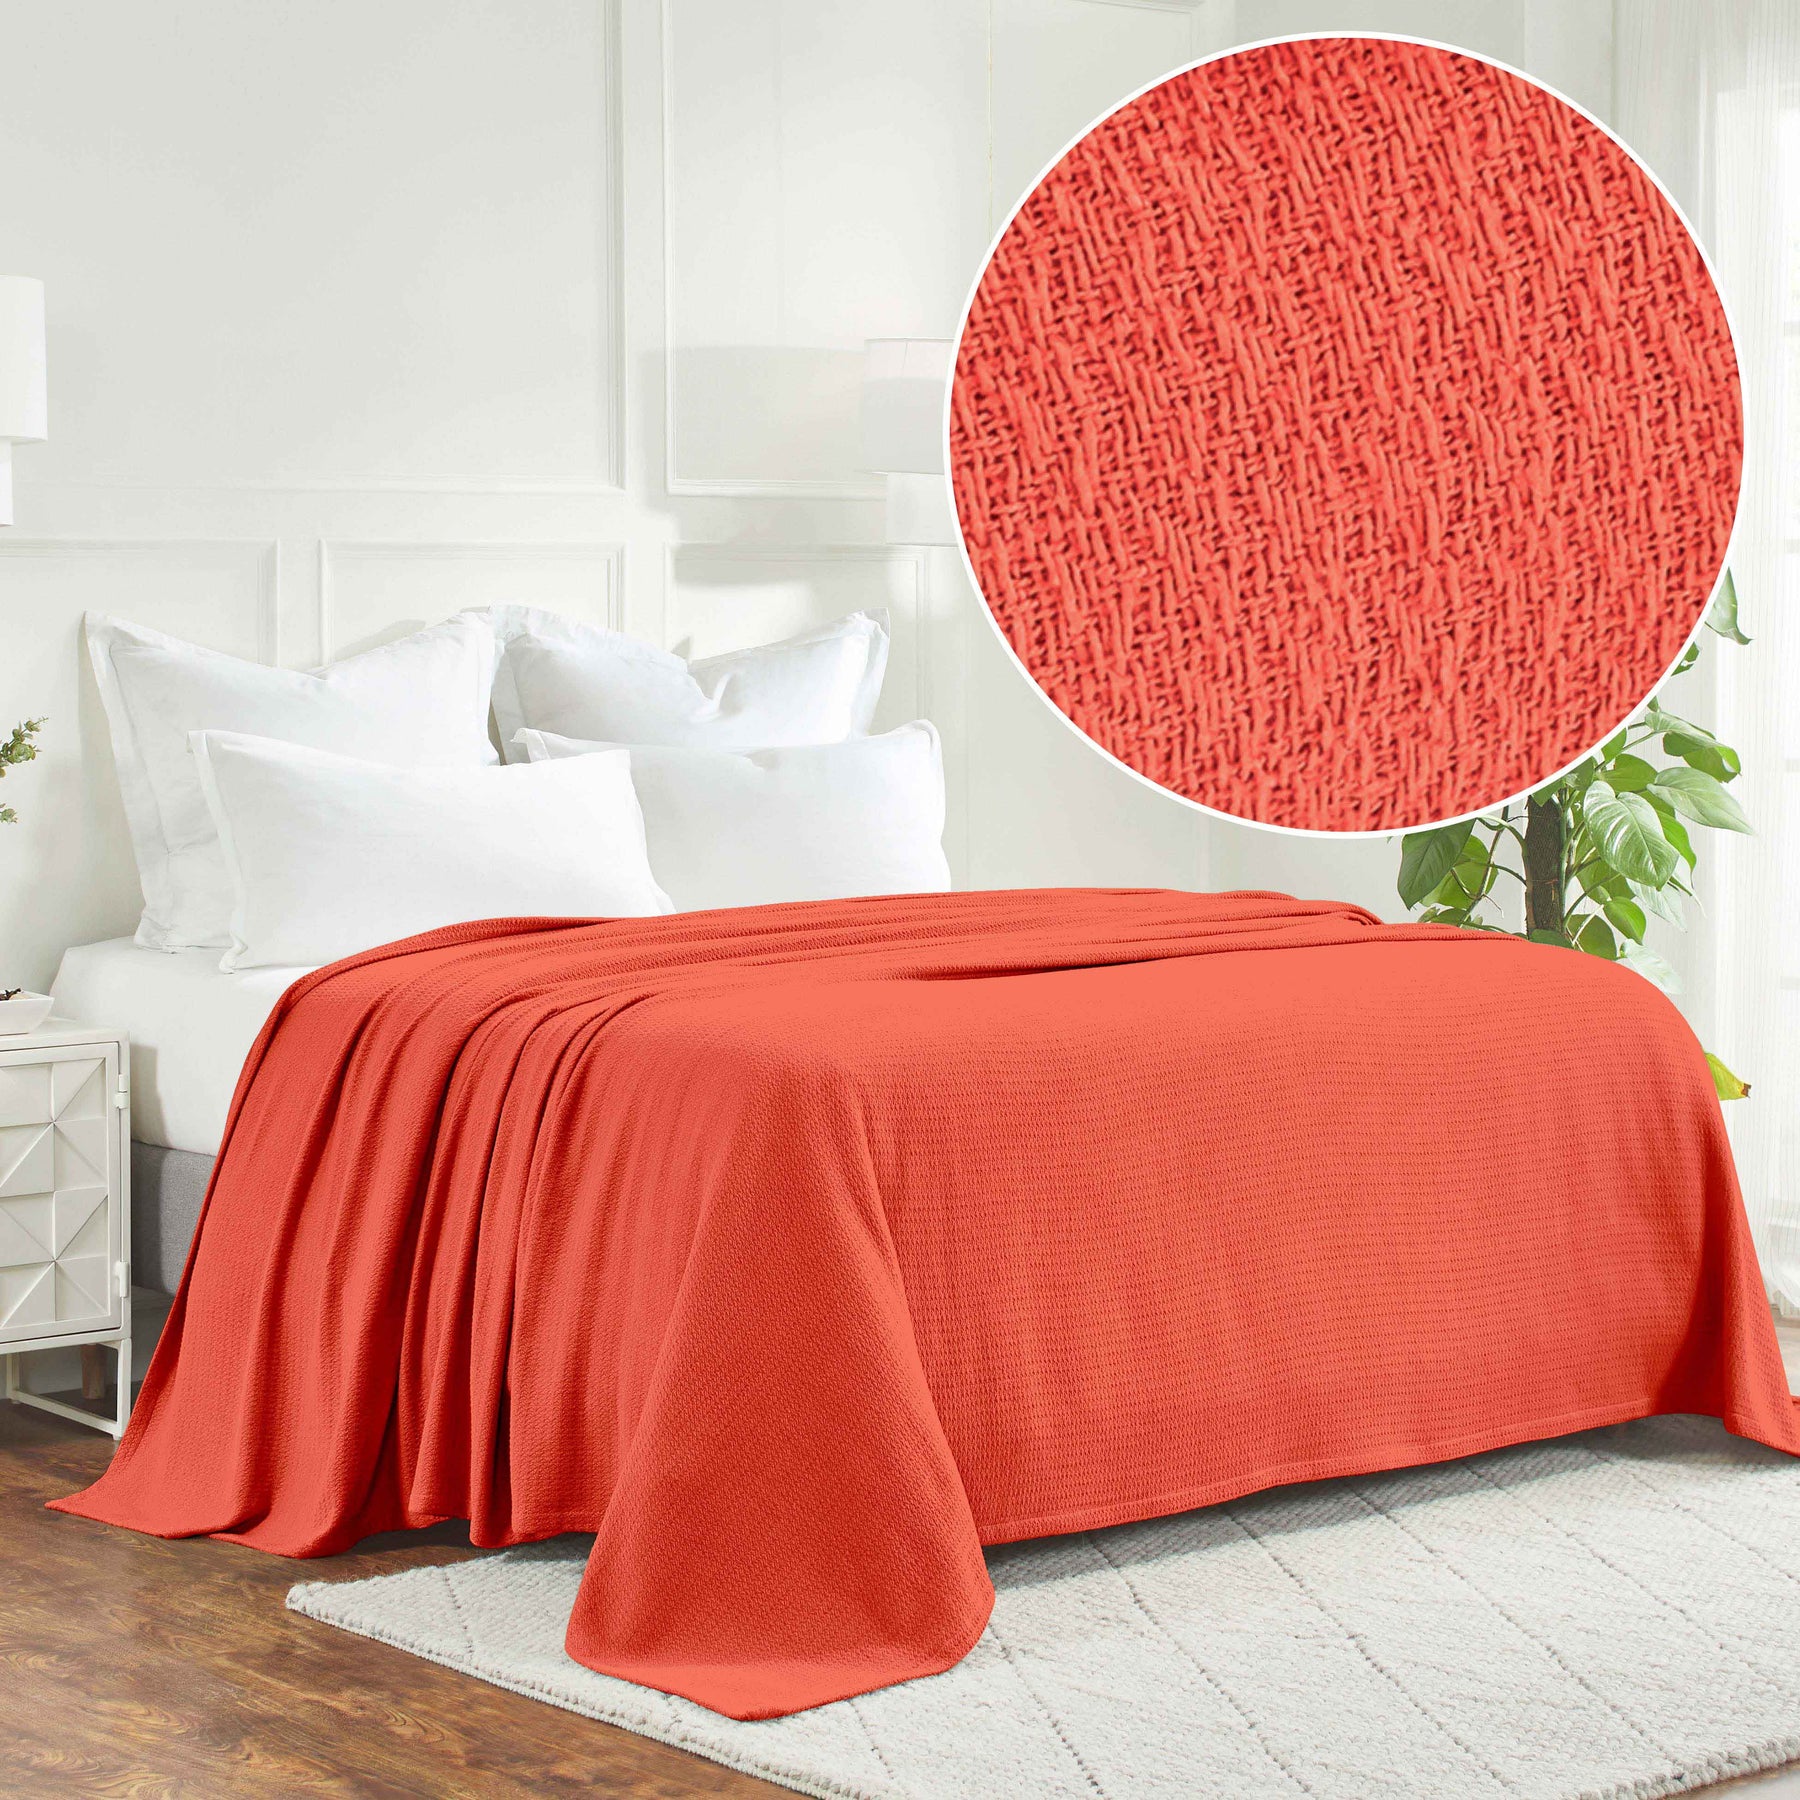 Waffle Weave Honeycomb Knit Soft Solid Textured Cotton Blanket - Coral